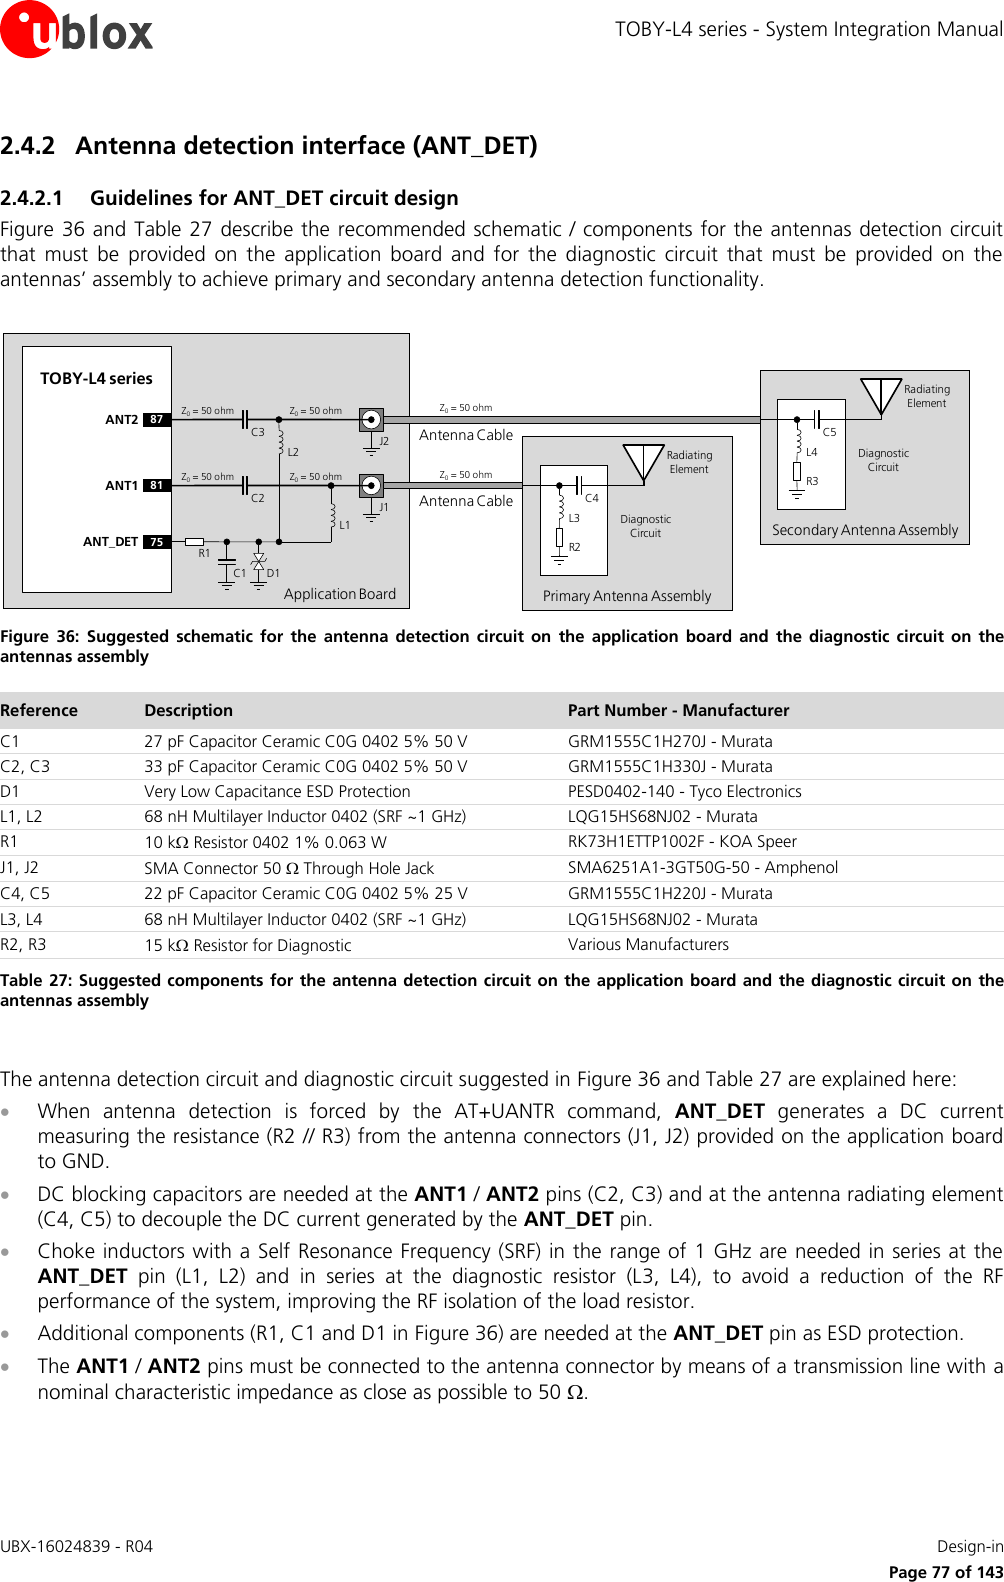 TOBY-L4 series - System Integration Manual UBX-16024839 - R04    Design-in     Page 77 of 143 2.4.2 Antenna detection interface (ANT_DET) 2.4.2.1 Guidelines for ANT_DET circuit design Figure 36 and Table 27  describe the recommended schematic / components for the antennas detection circuit that  must  be  provided  on  the  application  board  and  for  the  diagnostic  circuit  that  must  be  provided  on  the antennas’ assembly to achieve primary and secondary antenna detection functionality.  Application BoardAntenna CableTOBY-L4 series81ANT175ANT_DET R1C1 D1C2 J1Z0= 50 ohm Z0= 50 ohm Z0= 50 ohmPrimary Antenna AssemblyR2C4L3Radiating ElementDiagnostic CircuitL2L1Antenna Cable87ANT2C3 J2Z0= 50 ohm Z0= 50 ohm Z0= 50 ohmSecondary Antenna AssemblyR3C5L4Radiating ElementDiagnostic Circuit Figure  36:  Suggested  schematic  for  the  antenna detection  circuit  on  the  application  board  and  the  diagnostic  circuit  on  the antennas assembly Reference Description Part Number - Manufacturer C1 27 pF Capacitor Ceramic C0G 0402 5% 50 V GRM1555C1H270J - Murata C2, C3 33 pF Capacitor Ceramic C0G 0402 5% 50 V GRM1555C1H330J - Murata D1 Very Low Capacitance ESD Protection PESD0402-140 - Tyco Electronics L1, L2 68 nH Multilayer Inductor 0402 (SRF ~1 GHz) LQG15HS68NJ02 - Murata R1 10 k Resistor 0402 1% 0.063 W RK73H1ETTP1002F - KOA Speer J1, J2 SMA Connector 50  Through Hole Jack SMA6251A1-3GT50G-50 - Amphenol C4, C5 22 pF Capacitor Ceramic C0G 0402 5% 25 V  GRM1555C1H220J - Murata L3, L4 68 nH Multilayer Inductor 0402 (SRF ~1 GHz) LQG15HS68NJ02 - Murata R2, R3 15 k Resistor for Diagnostic Various Manufacturers Table 27: Suggested components for the  antenna detection circuit on the  application board and the diagnostic circuit on the antennas assembly  The antenna detection circuit and diagnostic circuit suggested in Figure 36 and Table 27 are explained here:  When  antenna  detection  is  forced  by  the  AT+UANTR  command,  ANT_DET  generates  a  DC  current measuring the resistance (R2 // R3) from the antenna connectors (J1, J2) provided on the application board to GND.  DC blocking capacitors are needed at the ANT1 / ANT2 pins (C2, C3) and at the antenna radiating element (C4, C5) to decouple the DC current generated by the ANT_DET pin.  Choke inductors with a Self Resonance Frequency (SRF) in the range of 1 GHz are needed in series at the ANT_DET  pin  (L1,  L2)  and  in  series  at  the  diagnostic  resistor  (L3,  L4),  to  avoid  a  reduction  of  the  RF performance of the system, improving the RF isolation of the load resistor.   Additional components (R1, C1 and D1 in Figure 36) are needed at the ANT_DET pin as ESD protection.  The ANT1 / ANT2 pins must be connected to the antenna connector by means of a transmission line with a nominal characteristic impedance as close as possible to 50 .  